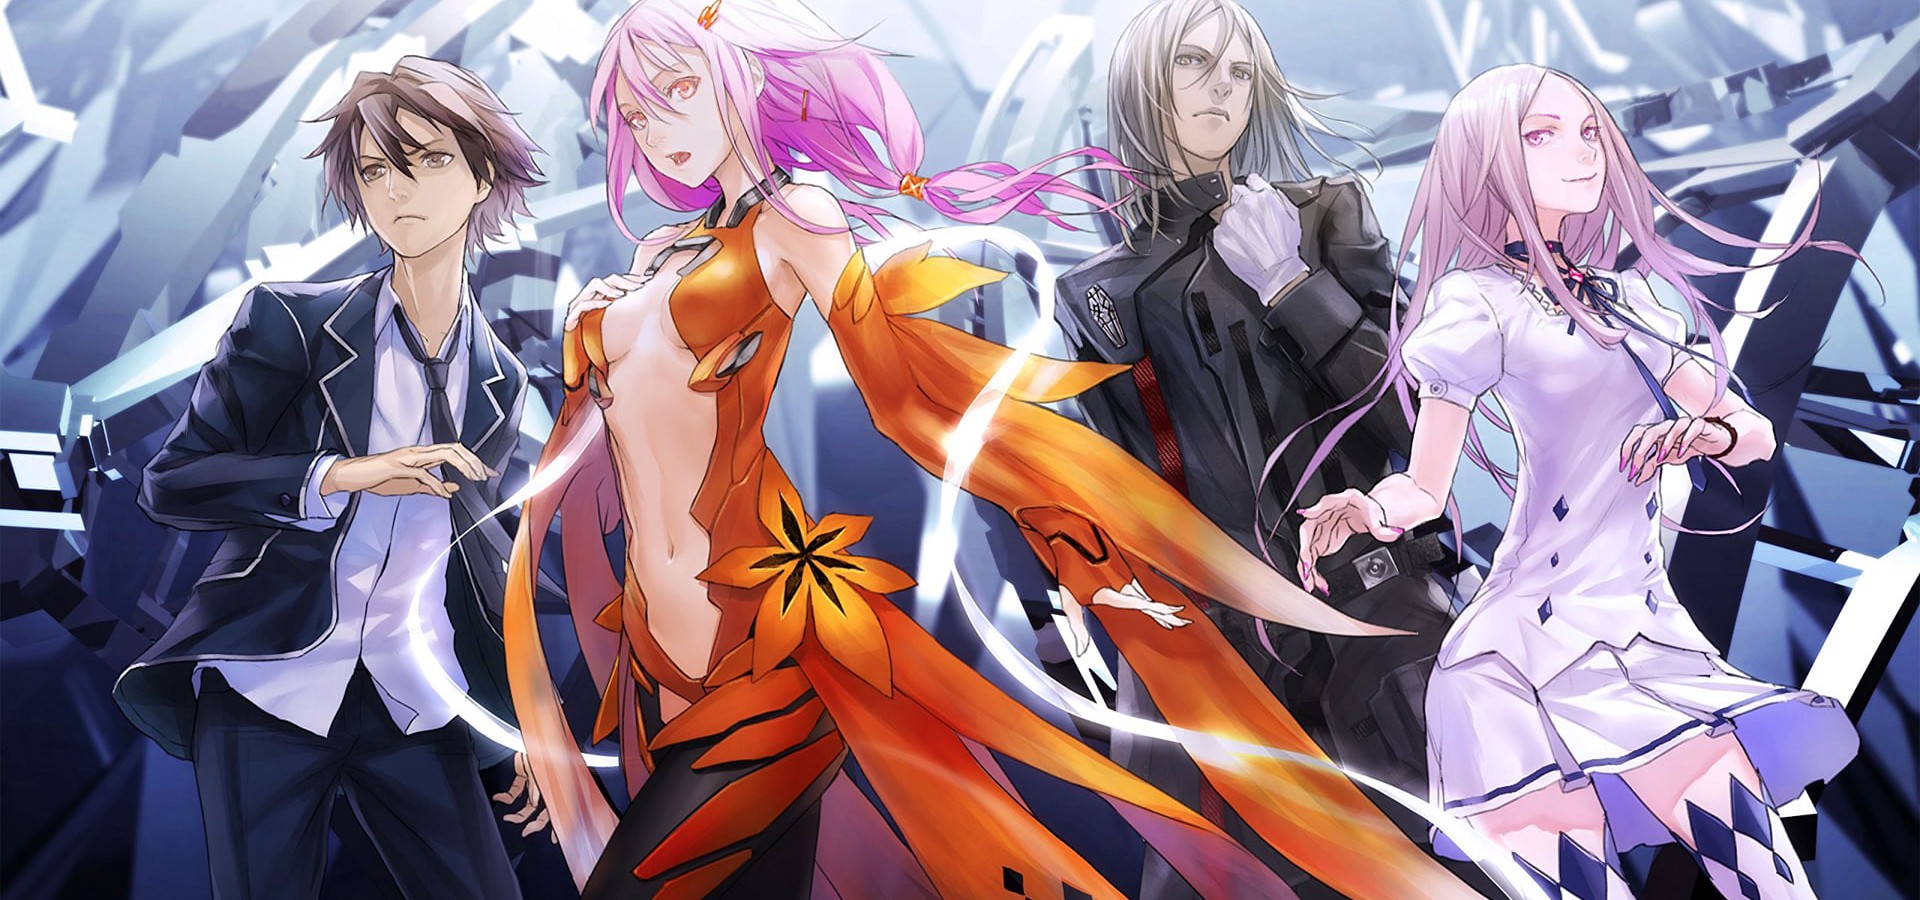 guilty crown streaming download